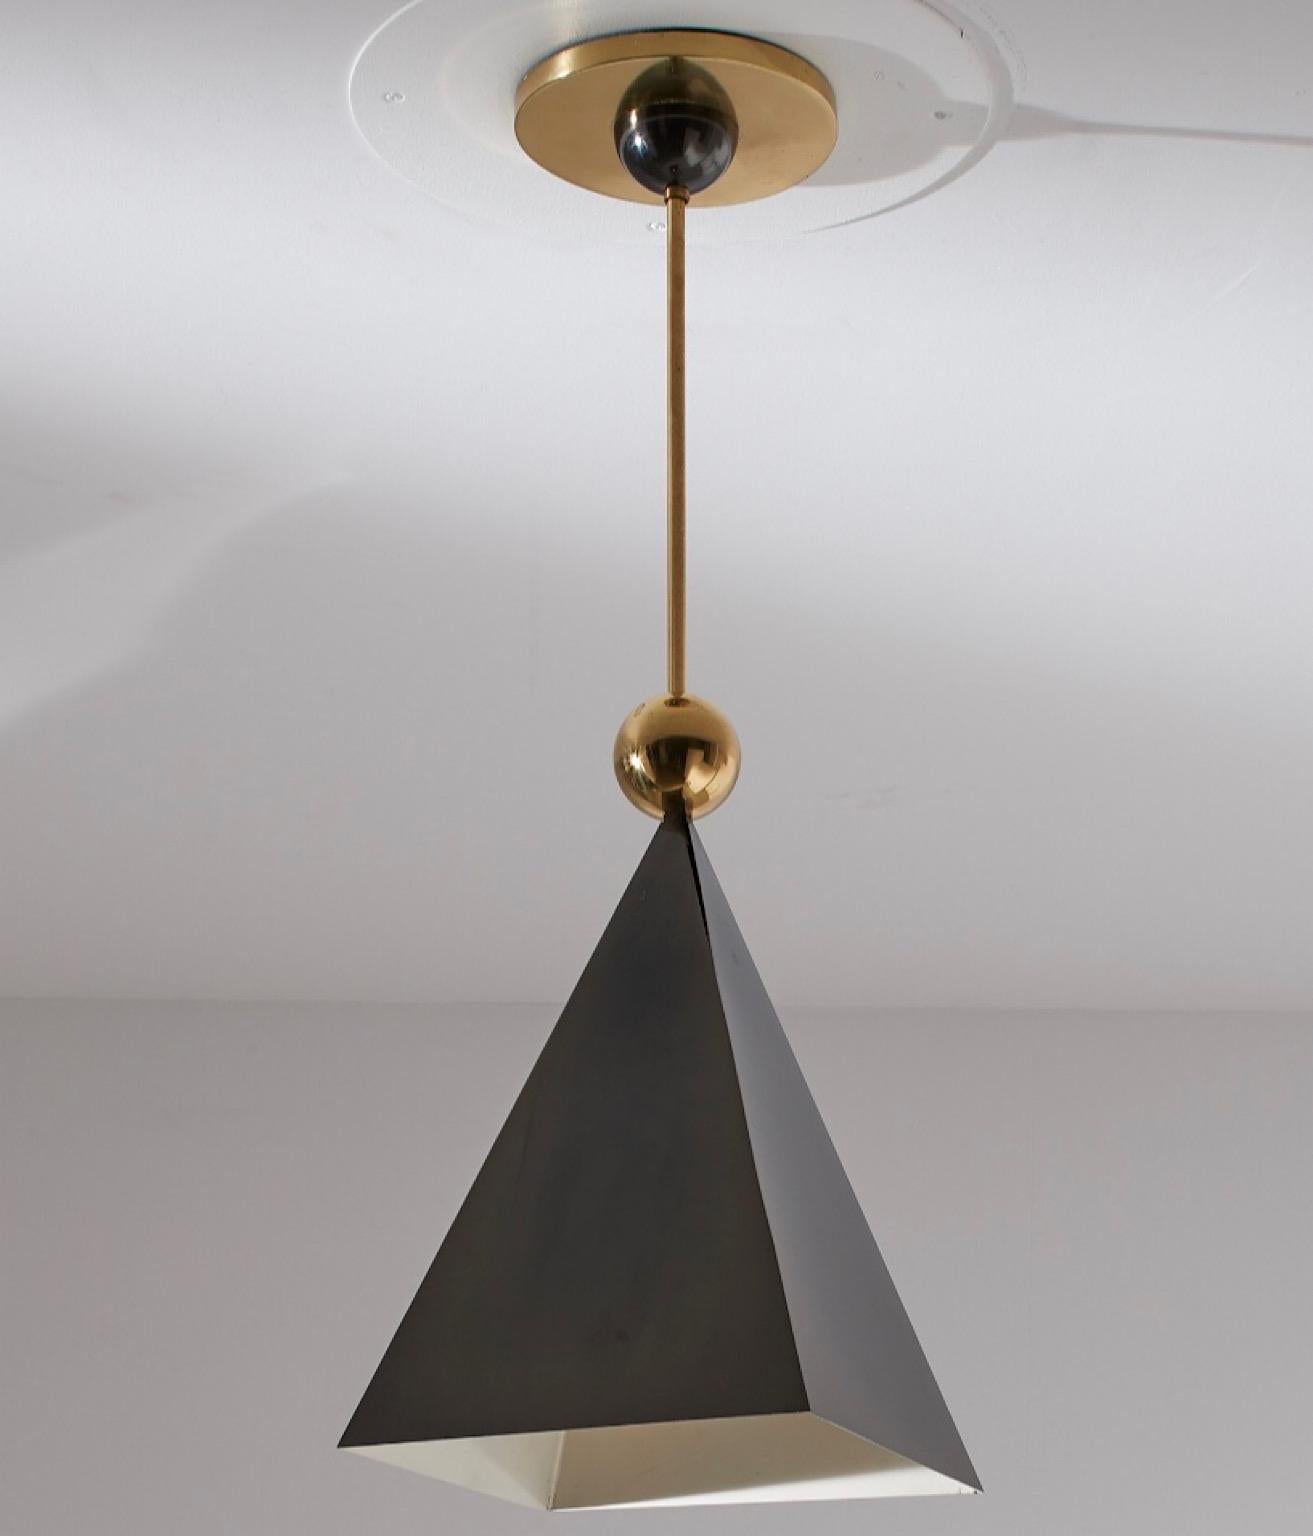 Luca Scacchetti, mod. PRIMA LUNA Chandelier in brass and burnished metal manufactured by BOTTEGA GADDA  in Milano
The burnished metal reflector has the pyramid-shaped that combines well with the brass sphere and the upper half sphere, recalling